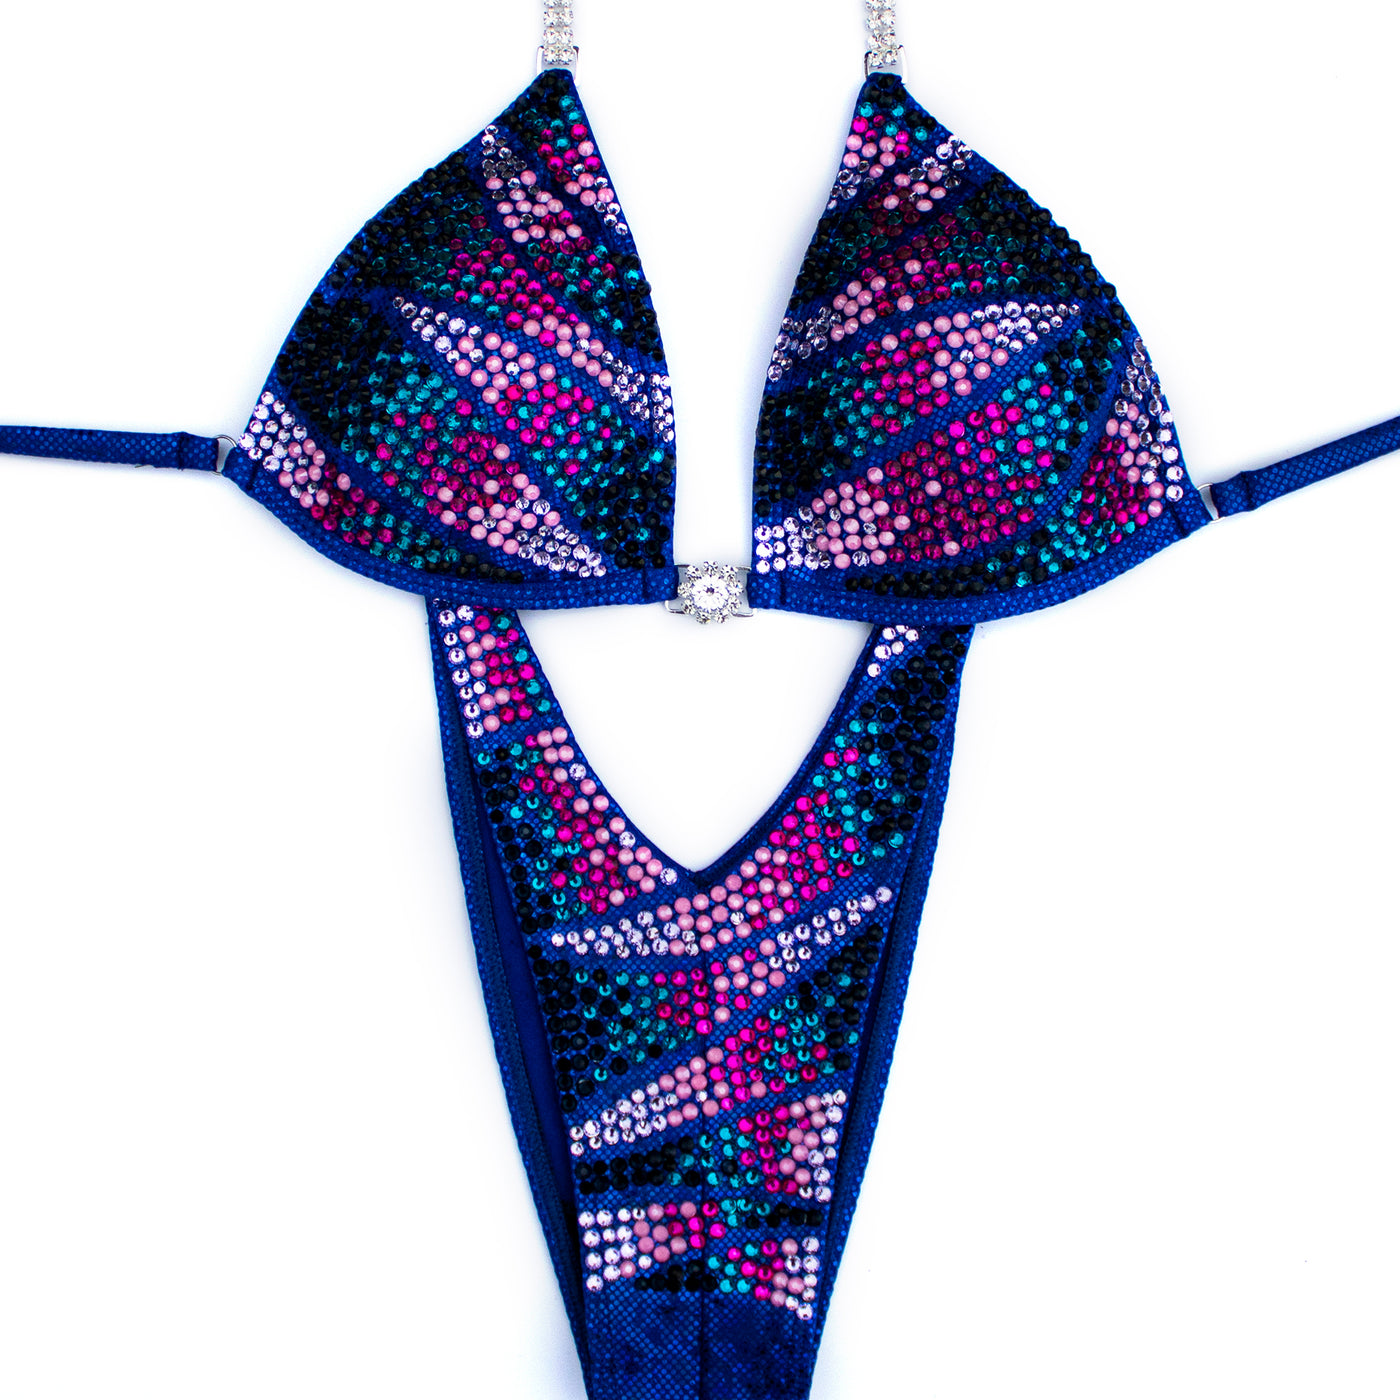 Clary Figure/WPD Competition Suit S/S | OMG Bikinis Rentals